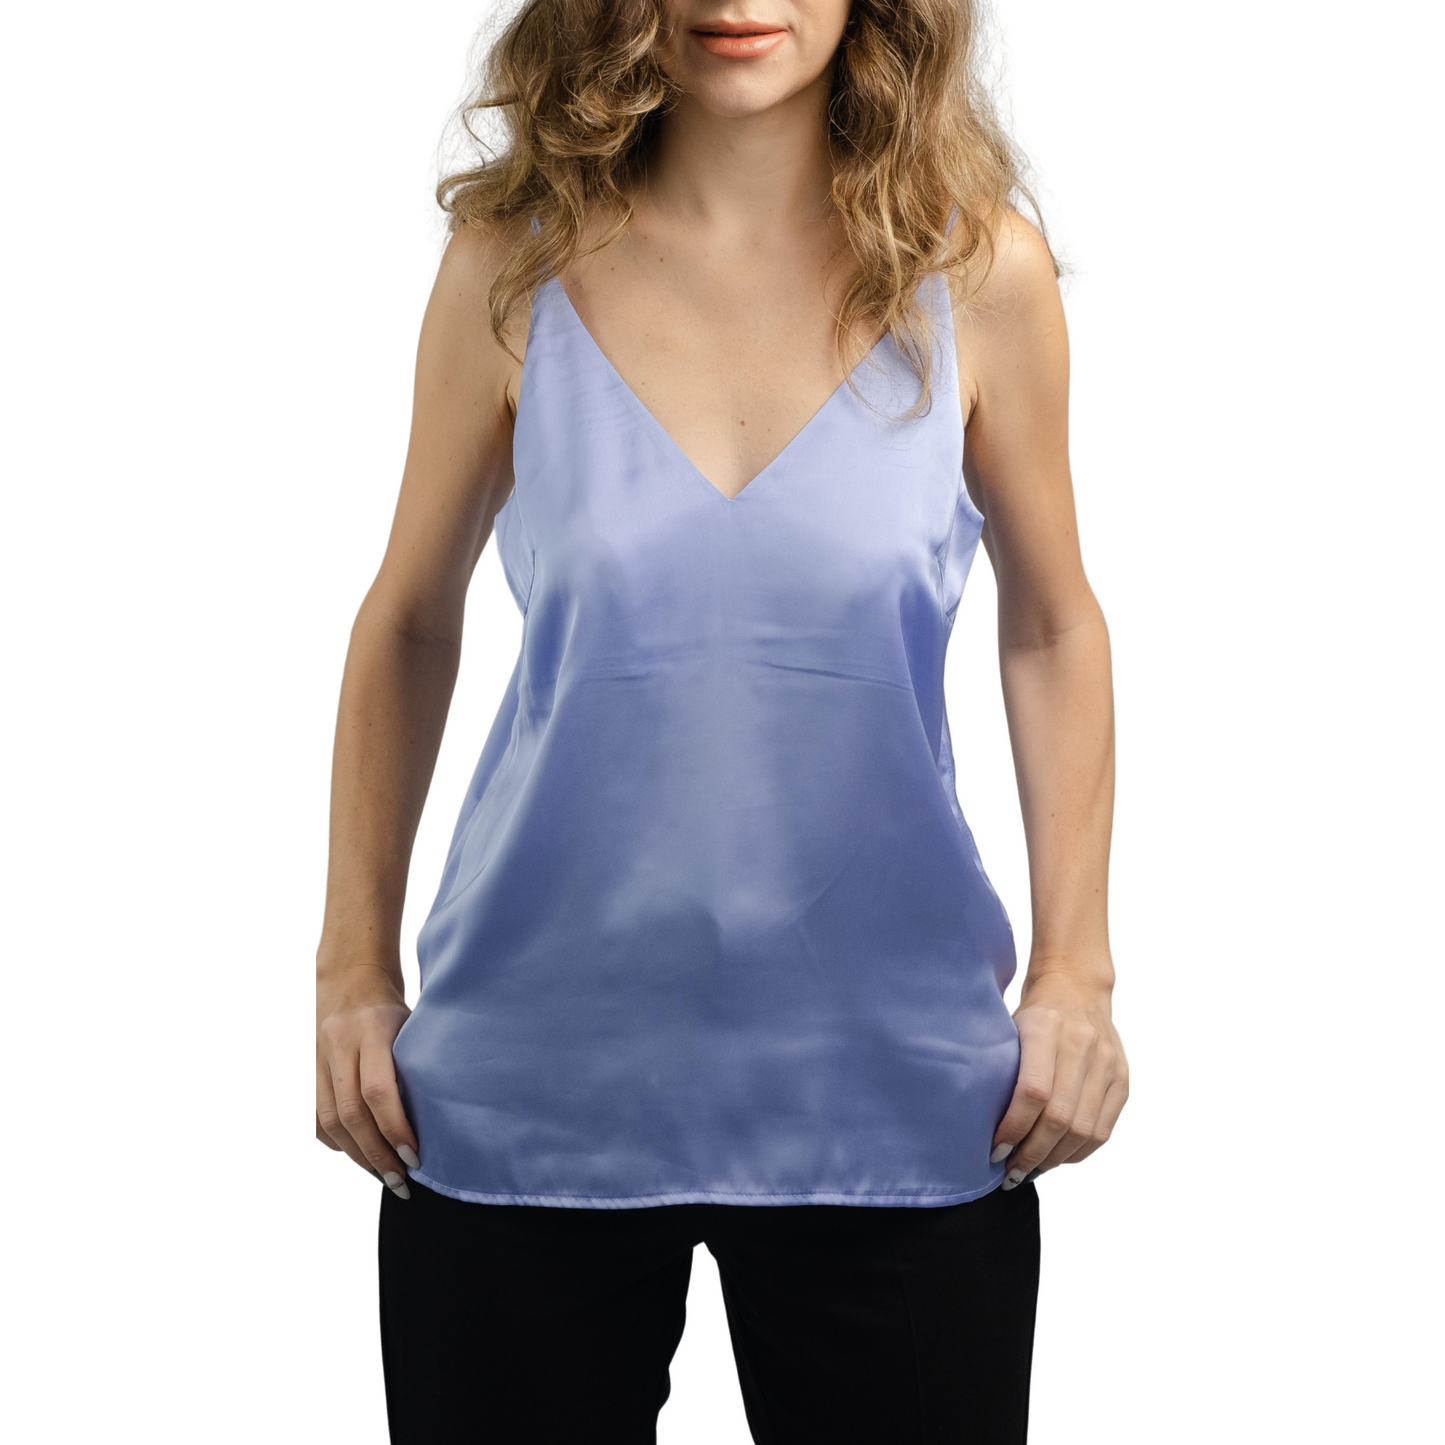 Women's V-Neck Adjustable Spaghetti Strap Satin Tank Top for Summer Business Casual